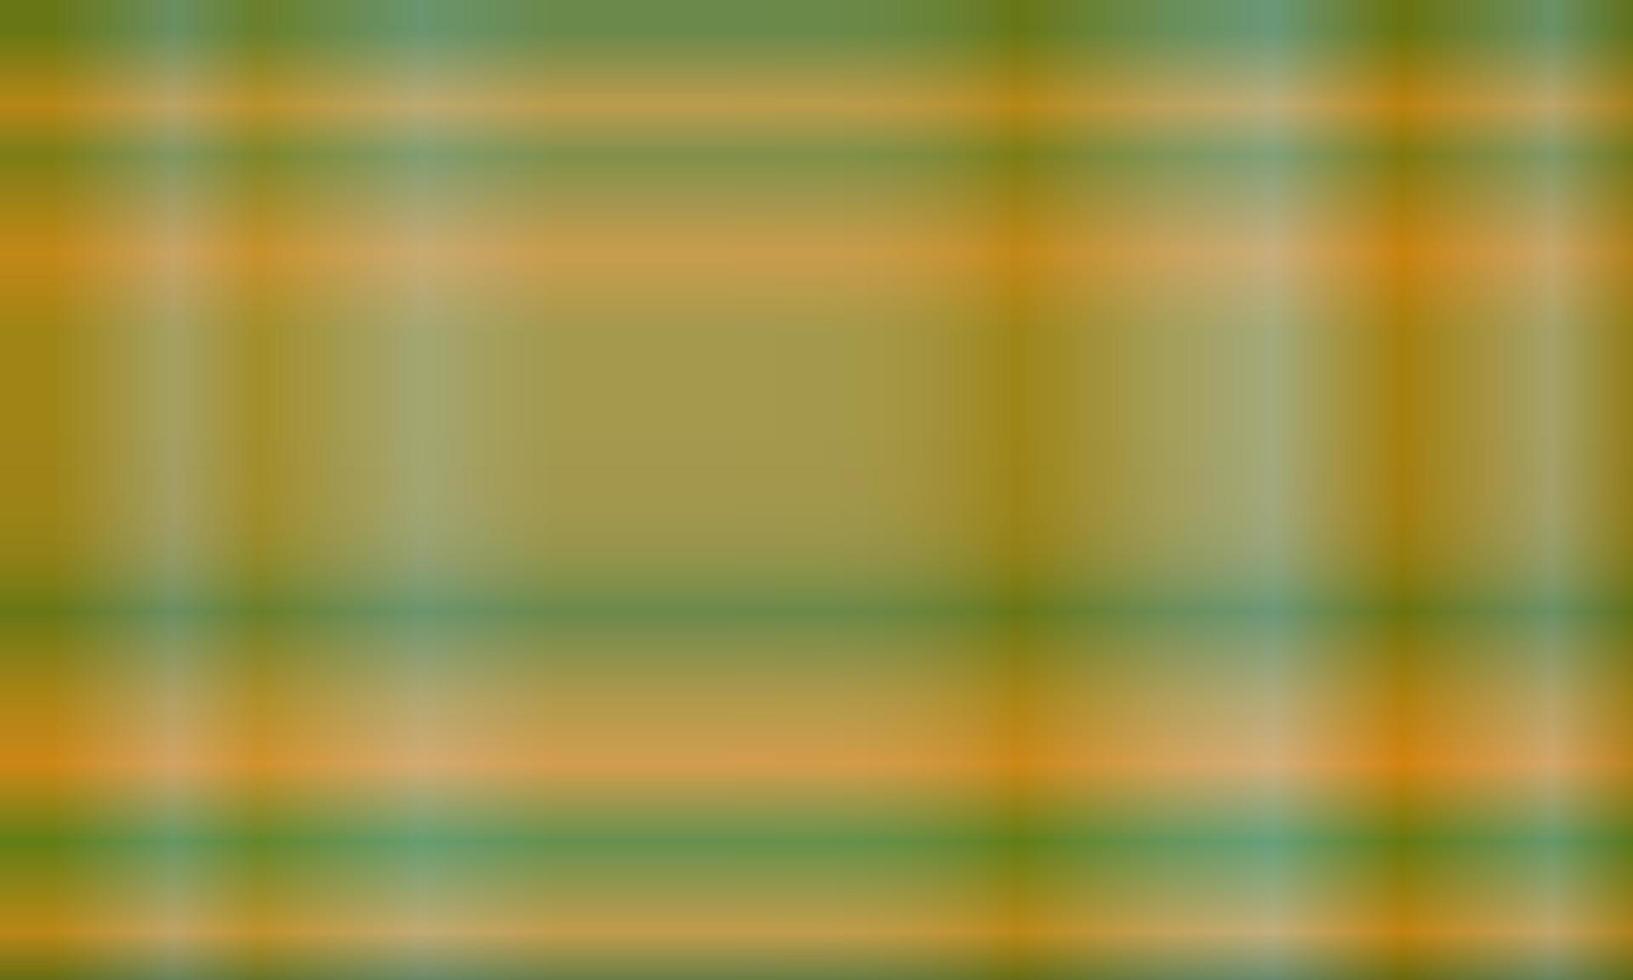 orange and dark green abstract background with light lines vertical and horizontal. pattern, gradient, blur, modern and colorful style. use for background, backdrop, wallpaper, banner or flyer vector